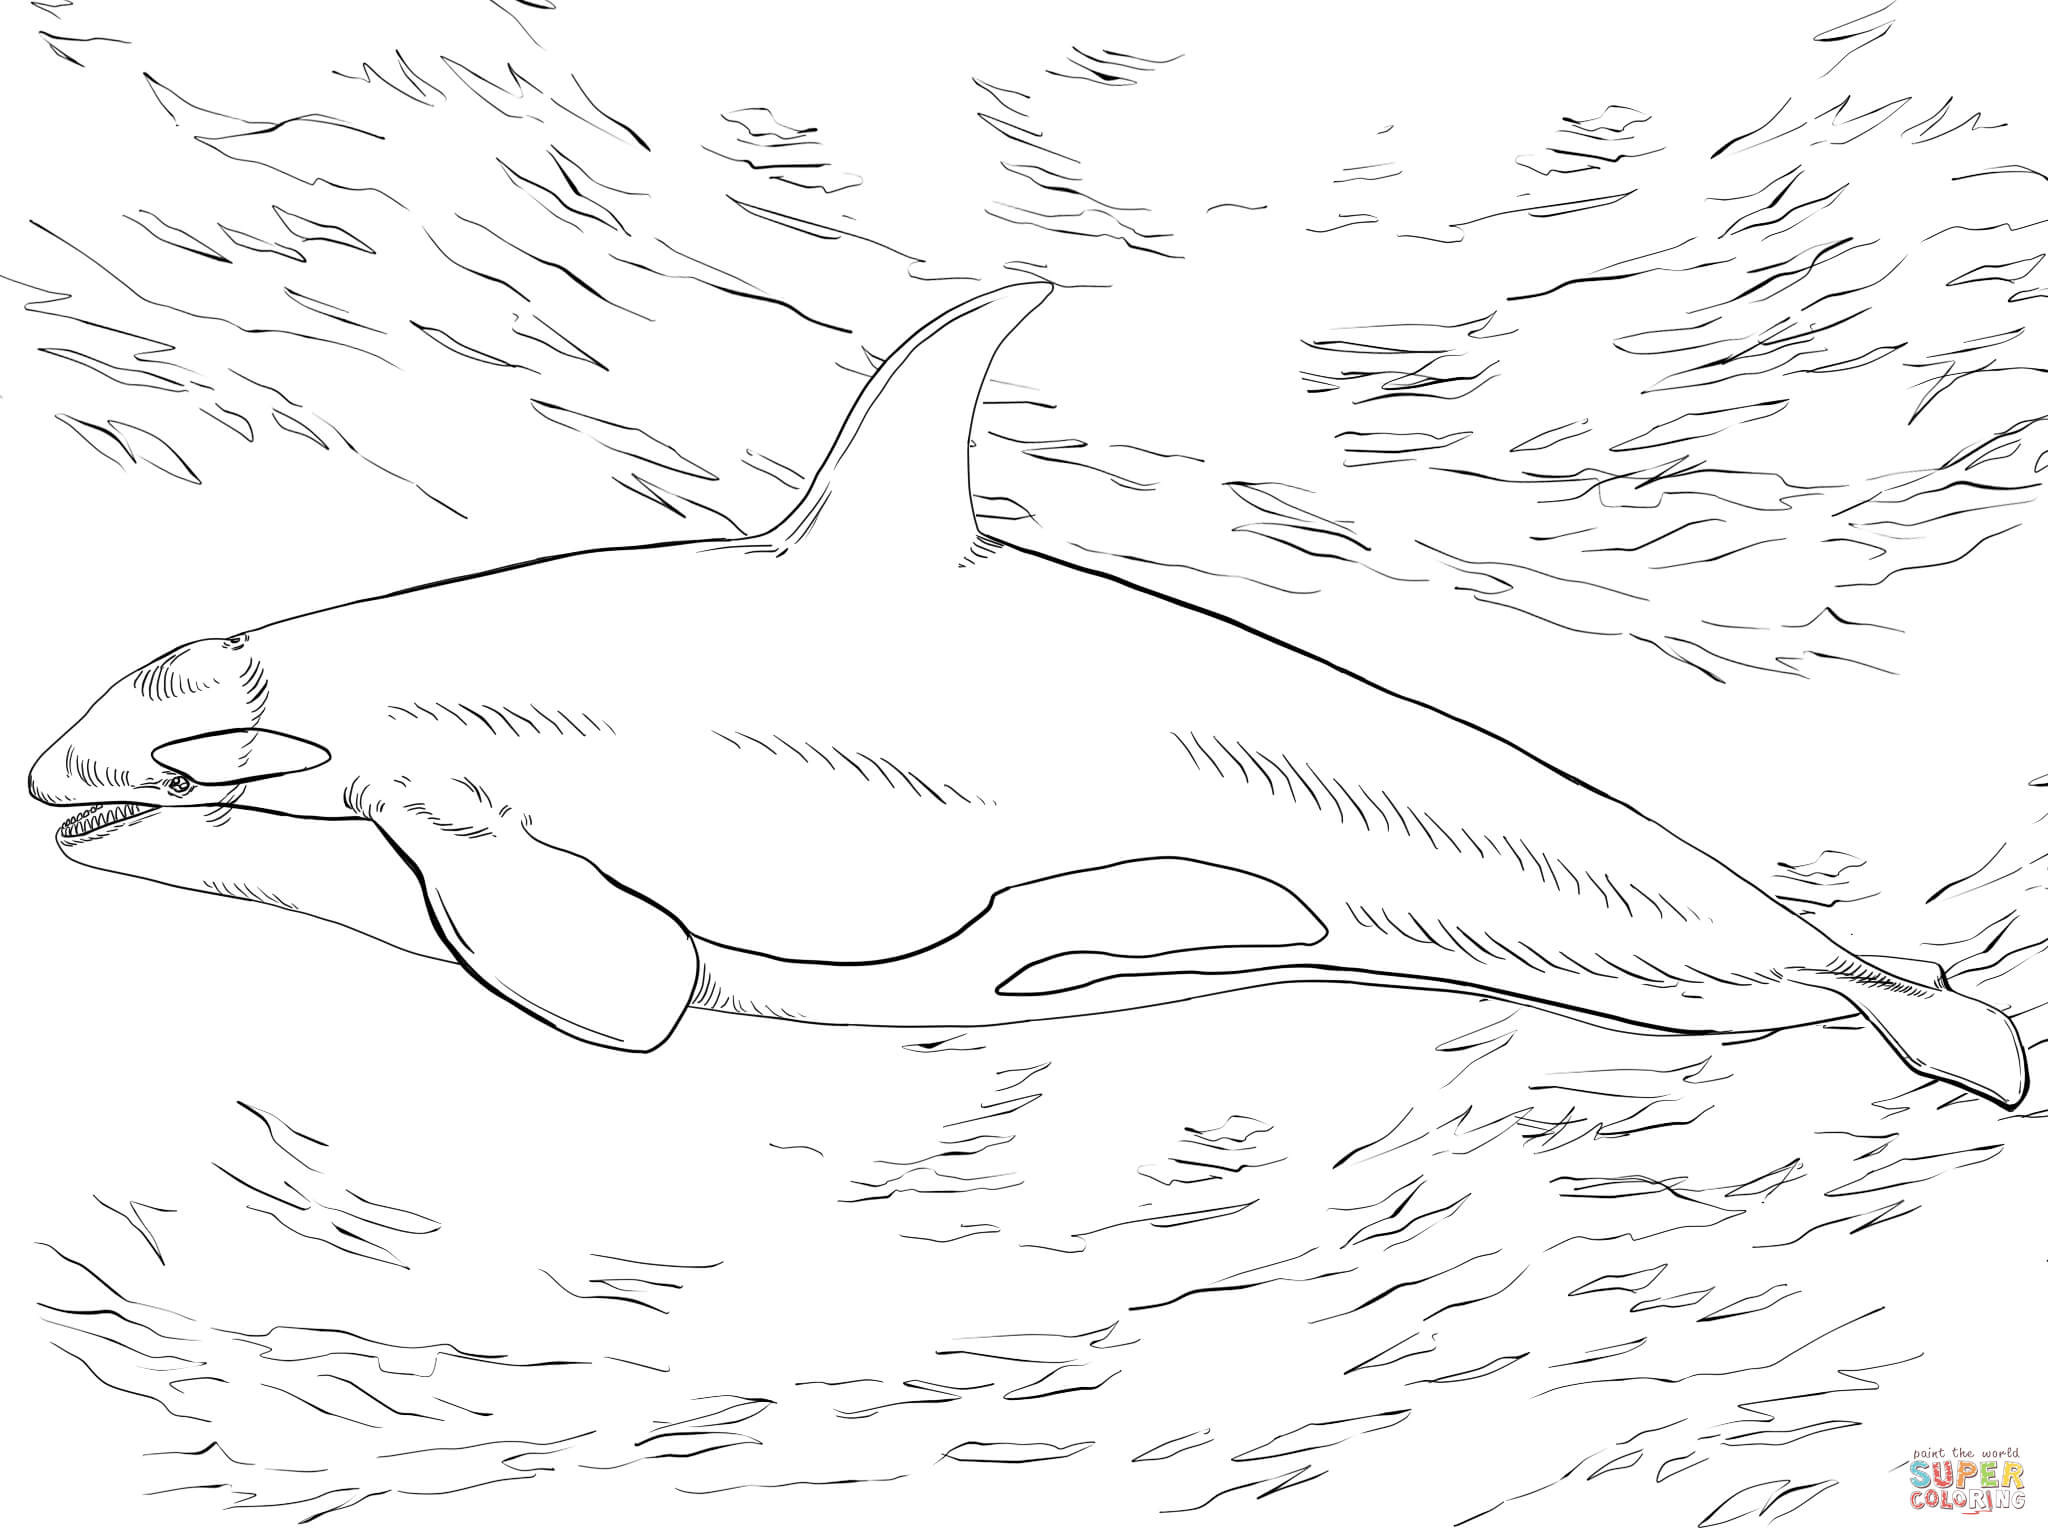 Shamu Coloring Pages Killer Whale Orca Coloring Page With Orca Coloring Pages Coloring